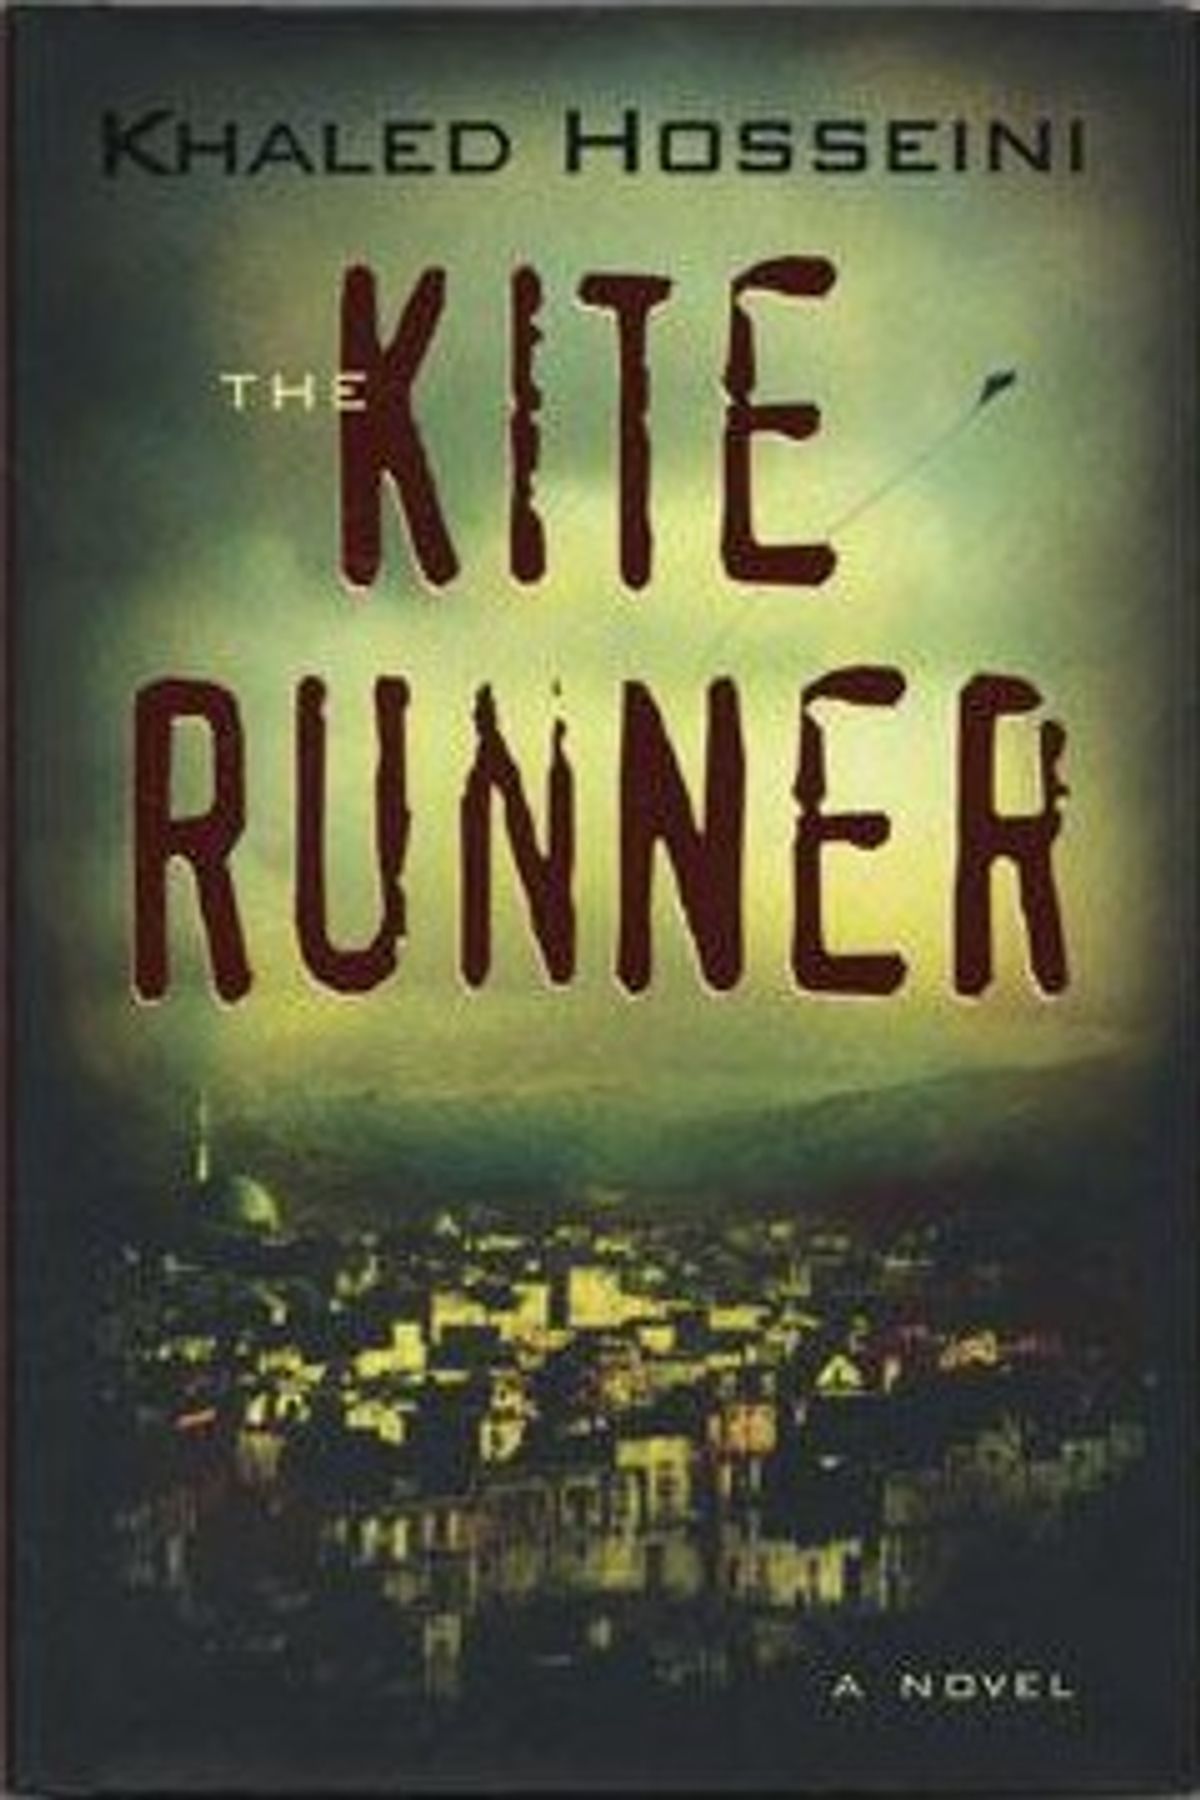 Why You Should Read "The Kite Runner" And "A Thousand Splendid Suns"